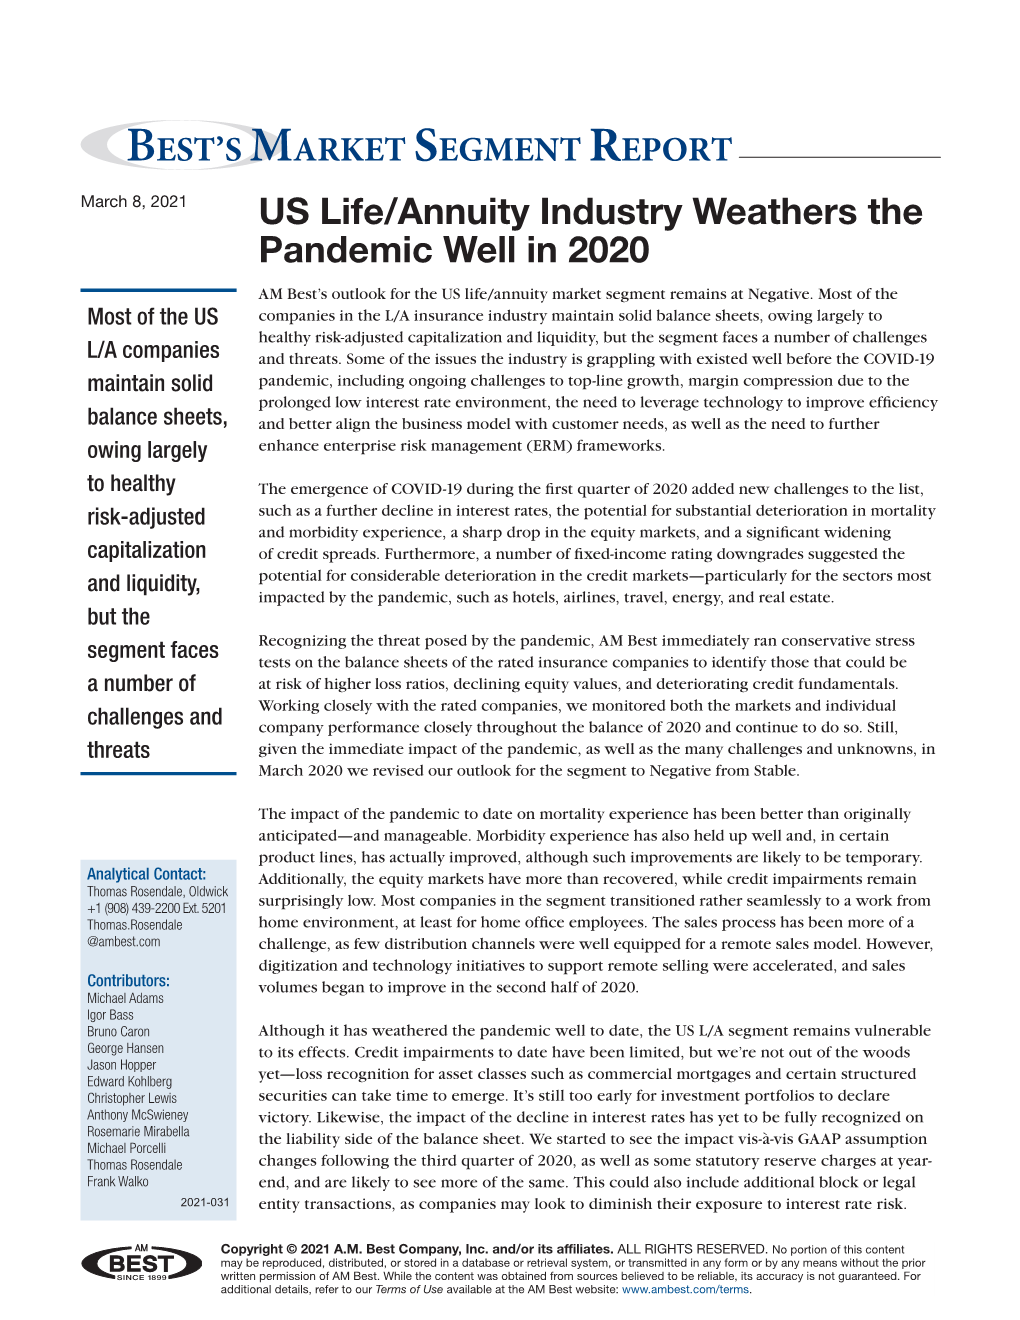 US Life/Annuity Industry Weathers the Pandemic Well in 2020 AM Best’S Outlook for the US Life/Annuity Market Segment Remains at Negative